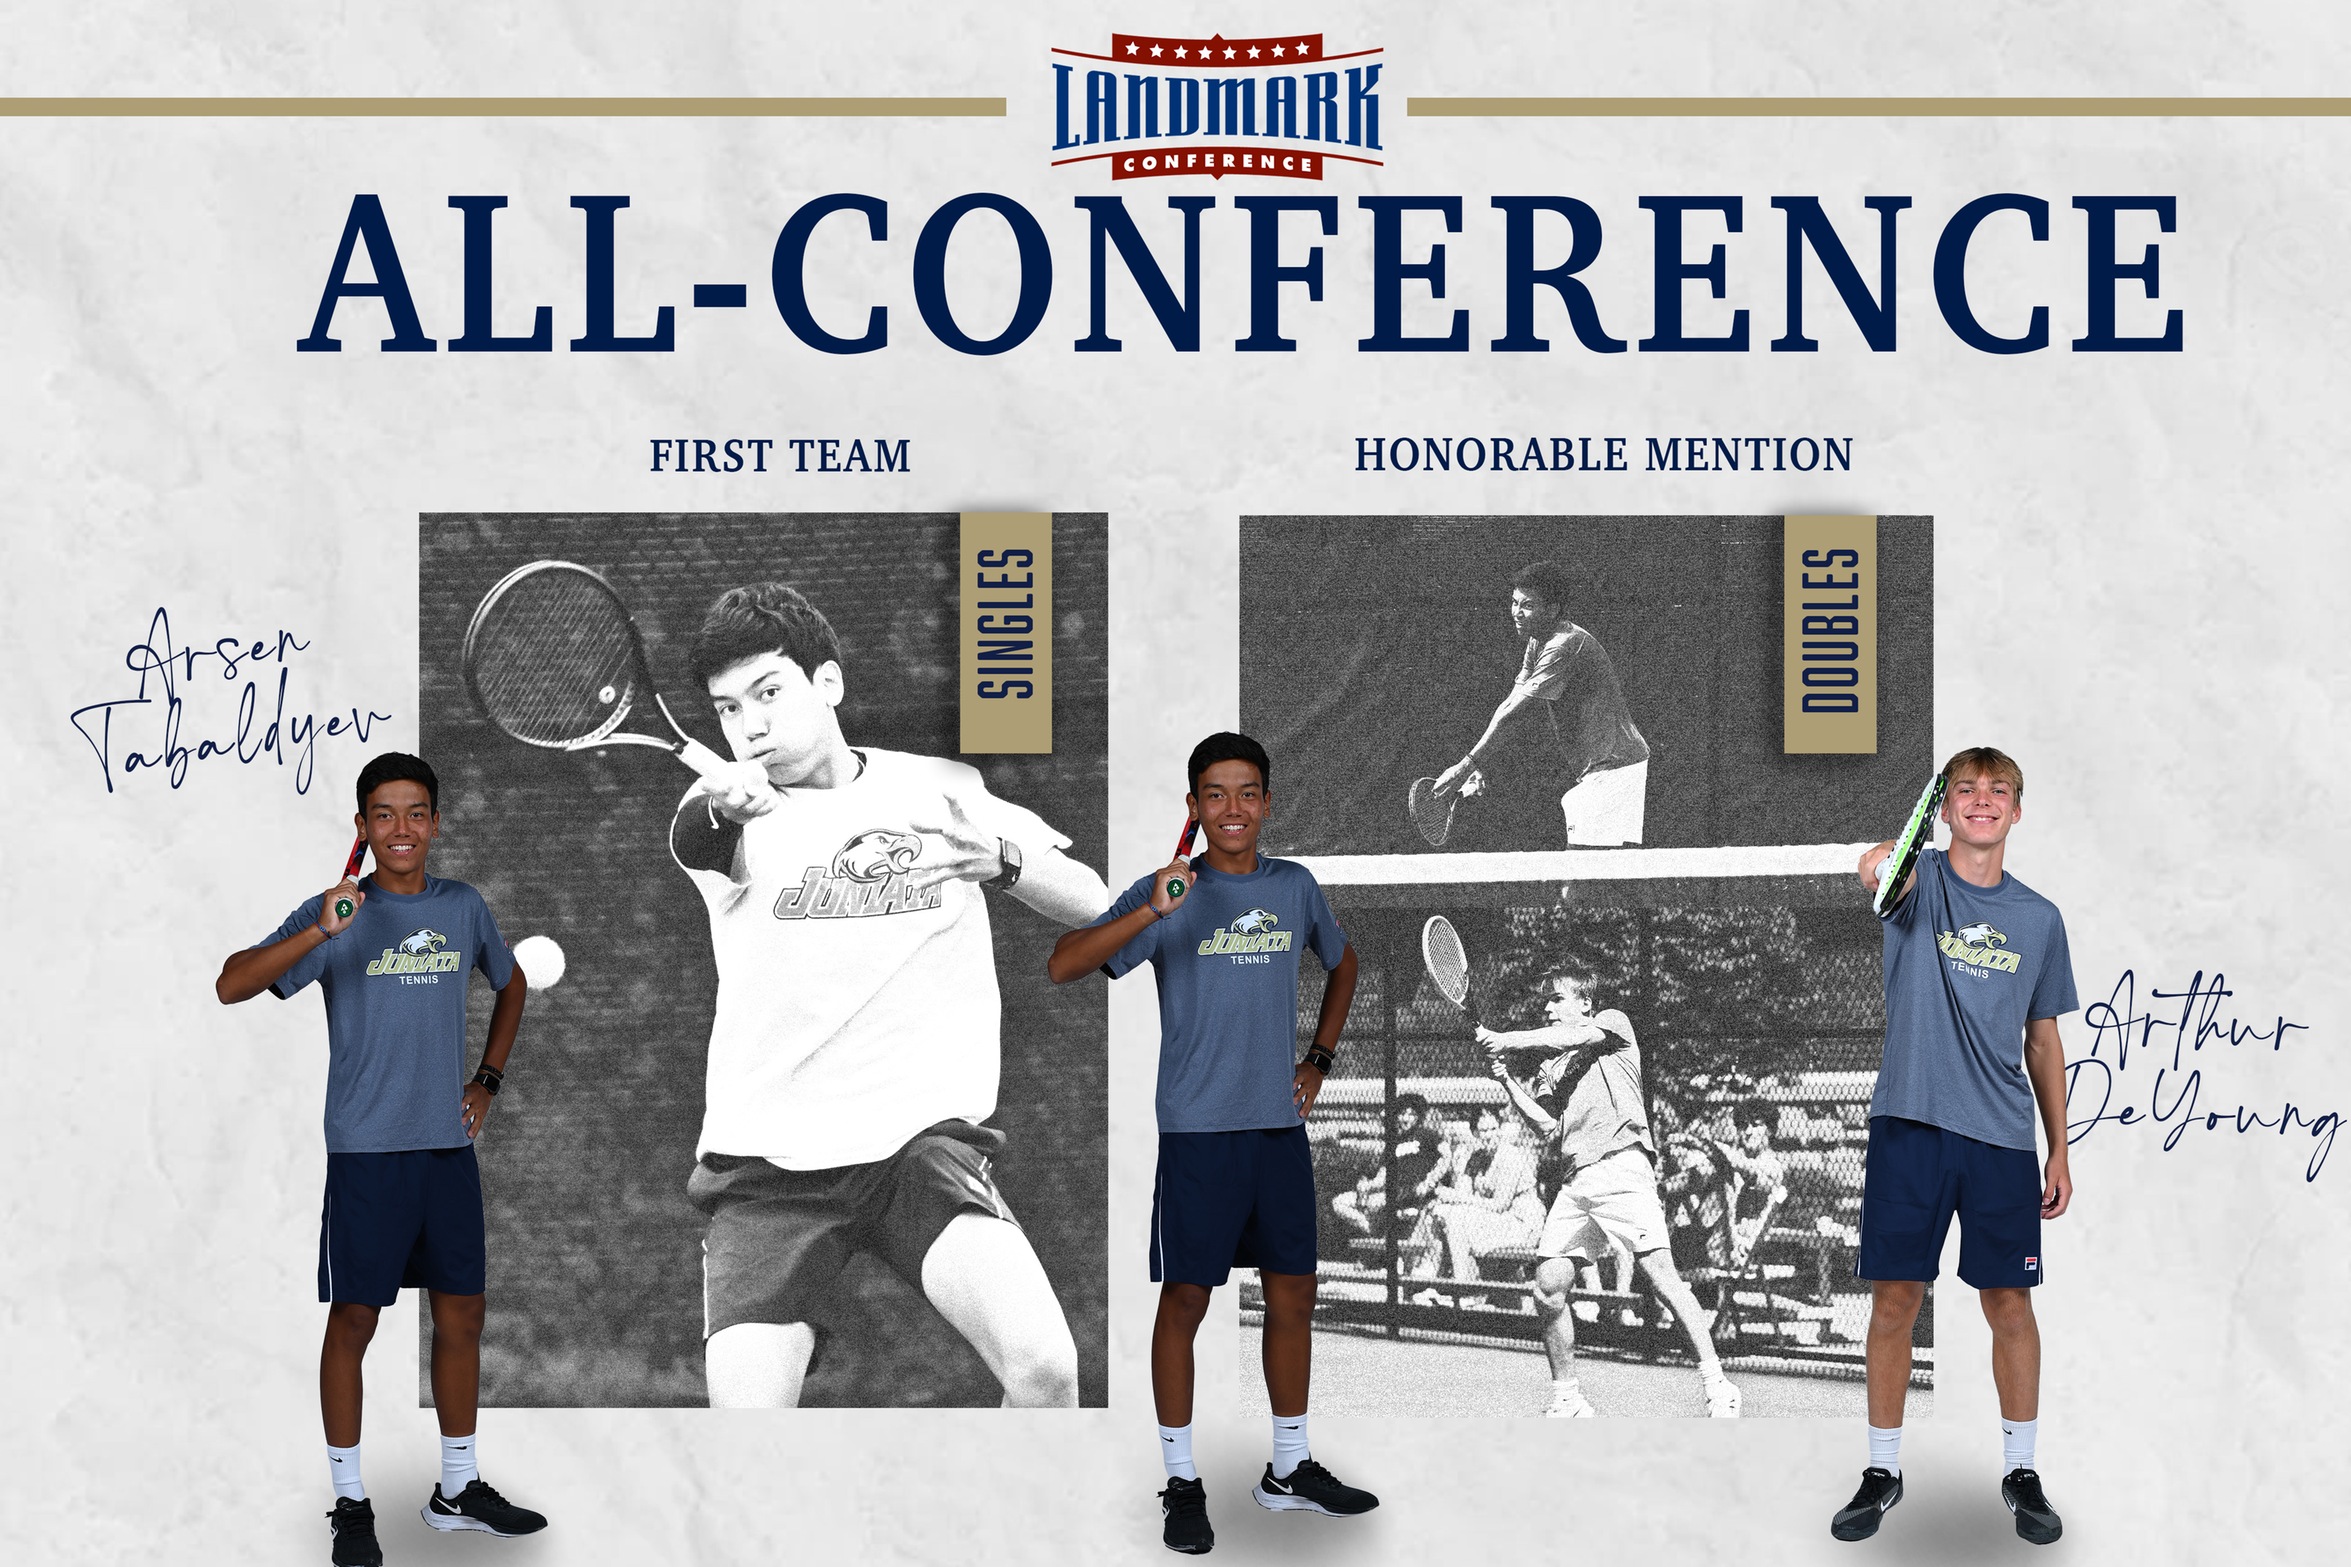 Tabaldyev Named Landmark Rookie of the Year and First Team; Tabaldyev/DeYoung duo earn Honorable Mention